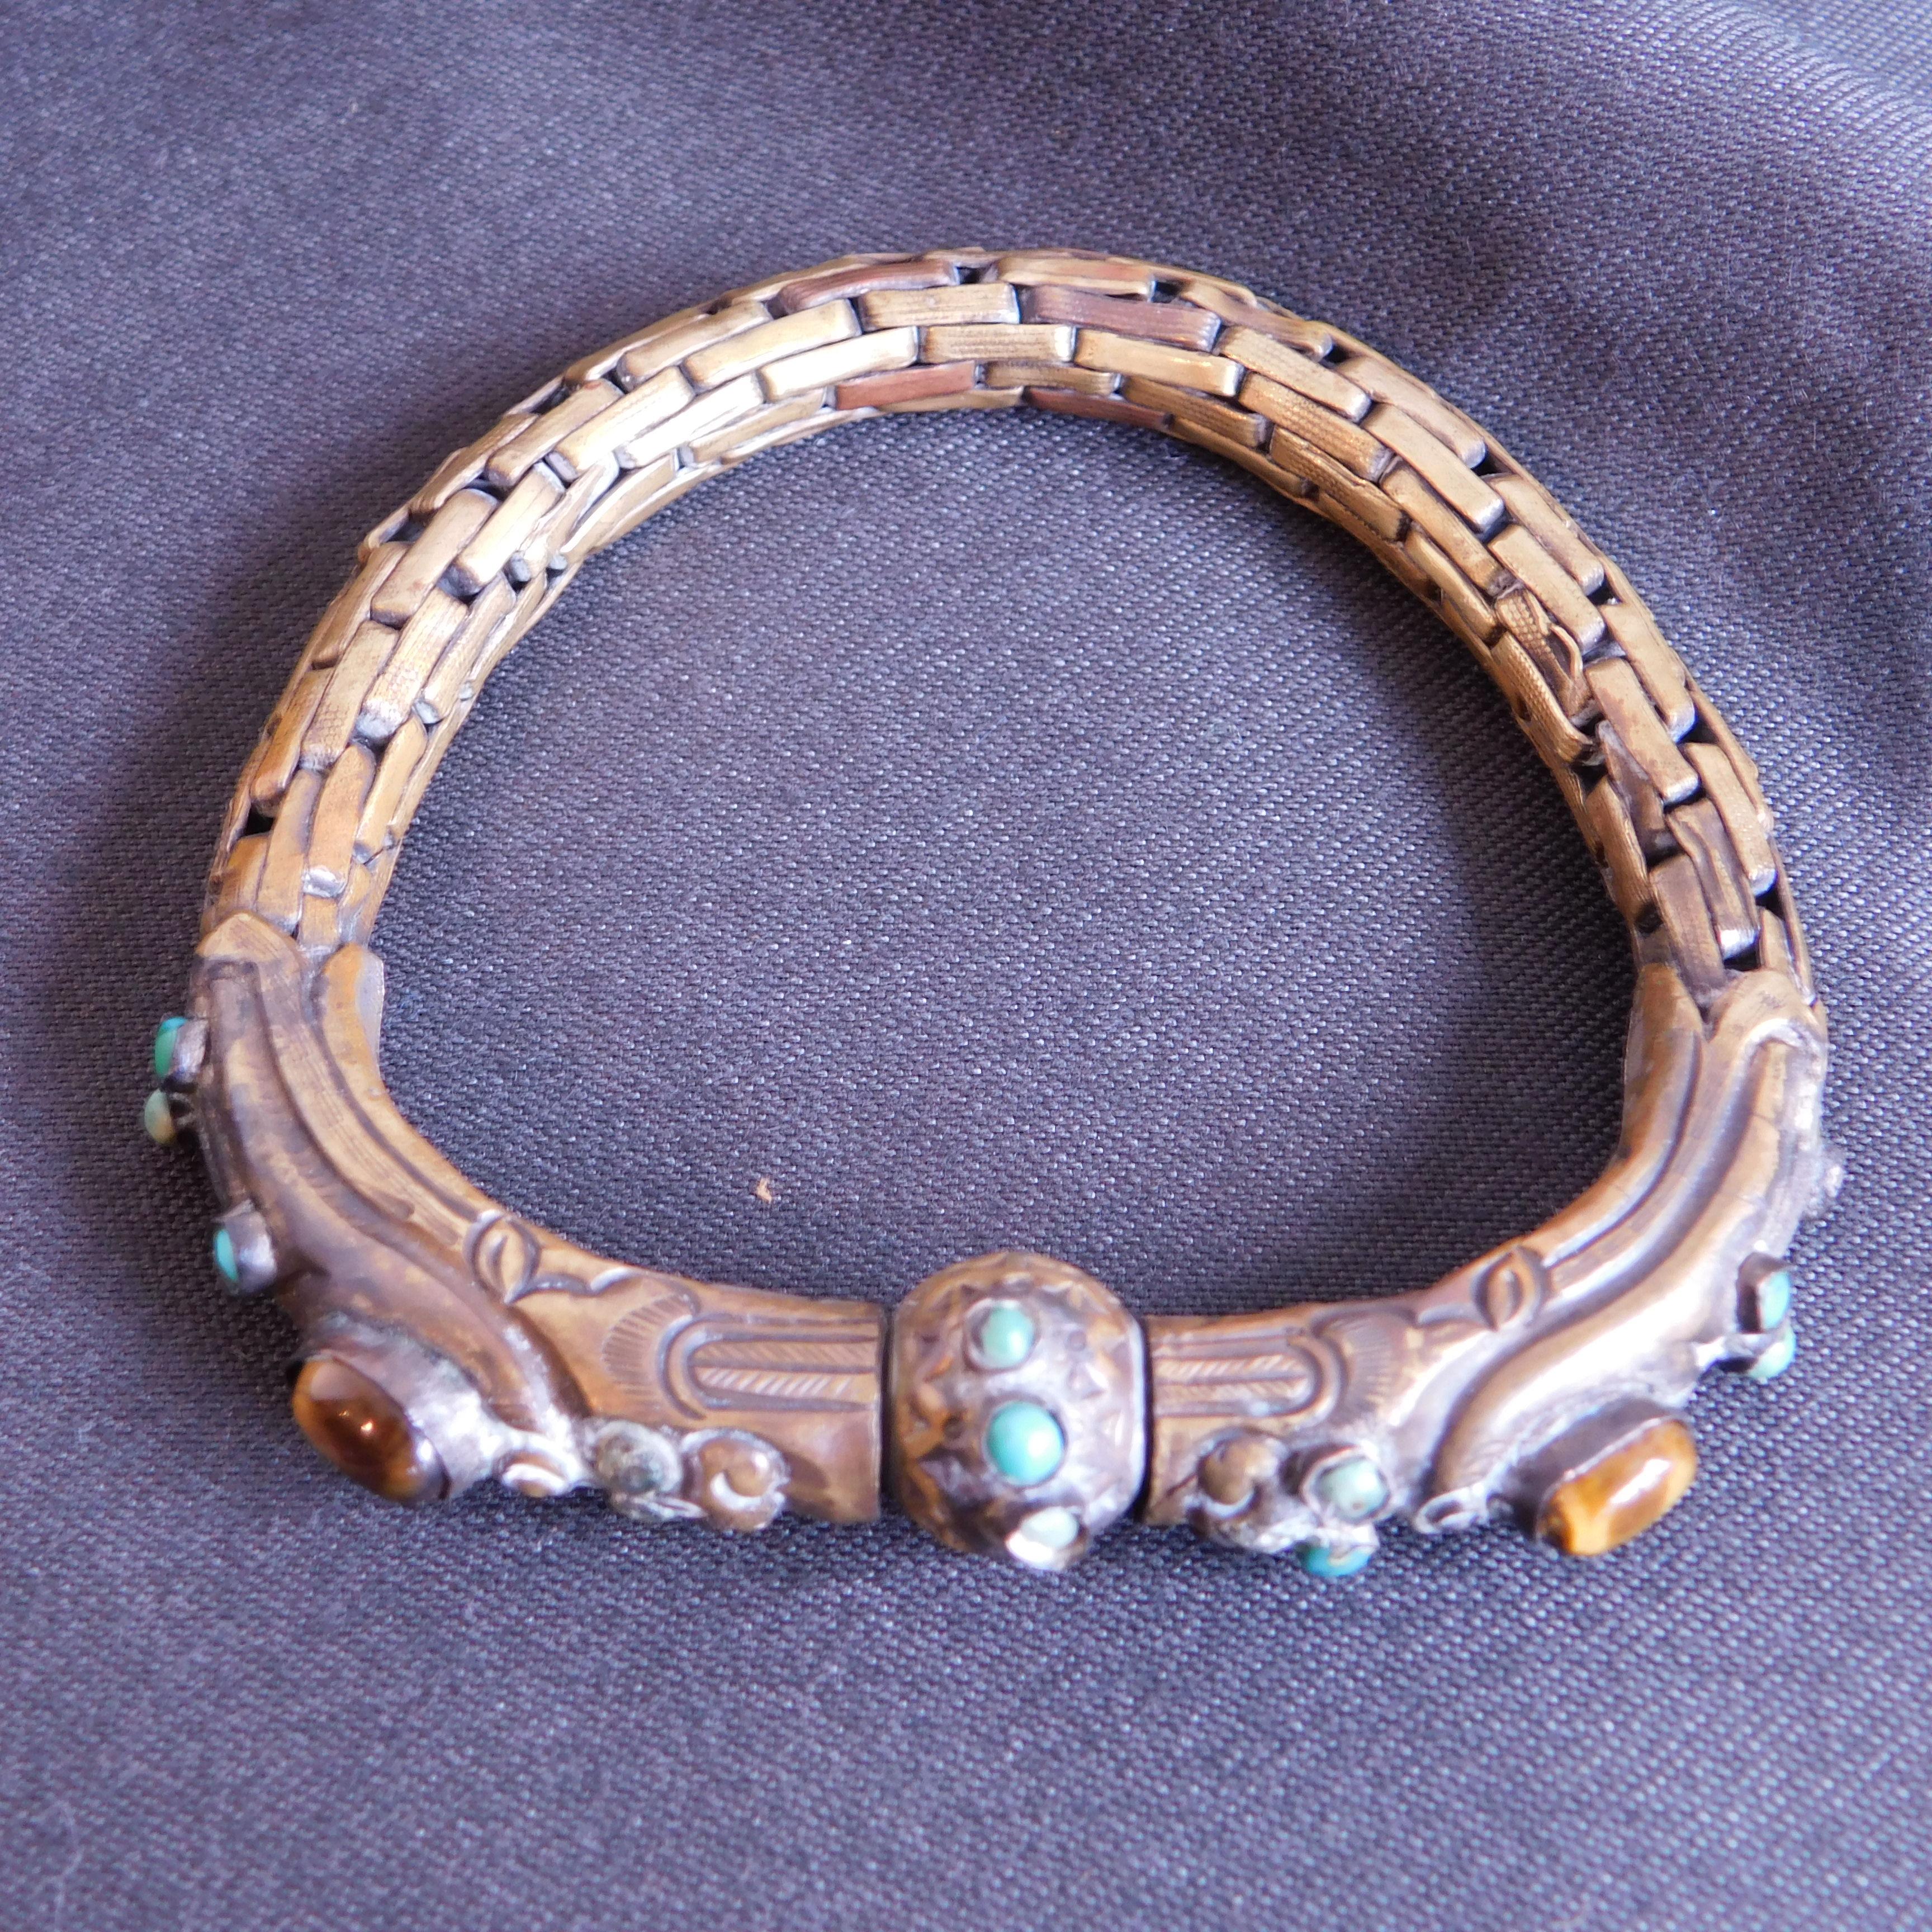 Antique Chinese Brass Bracelet with Turquoise and Tiger Eye Bezel Set Stones. For Sale 4